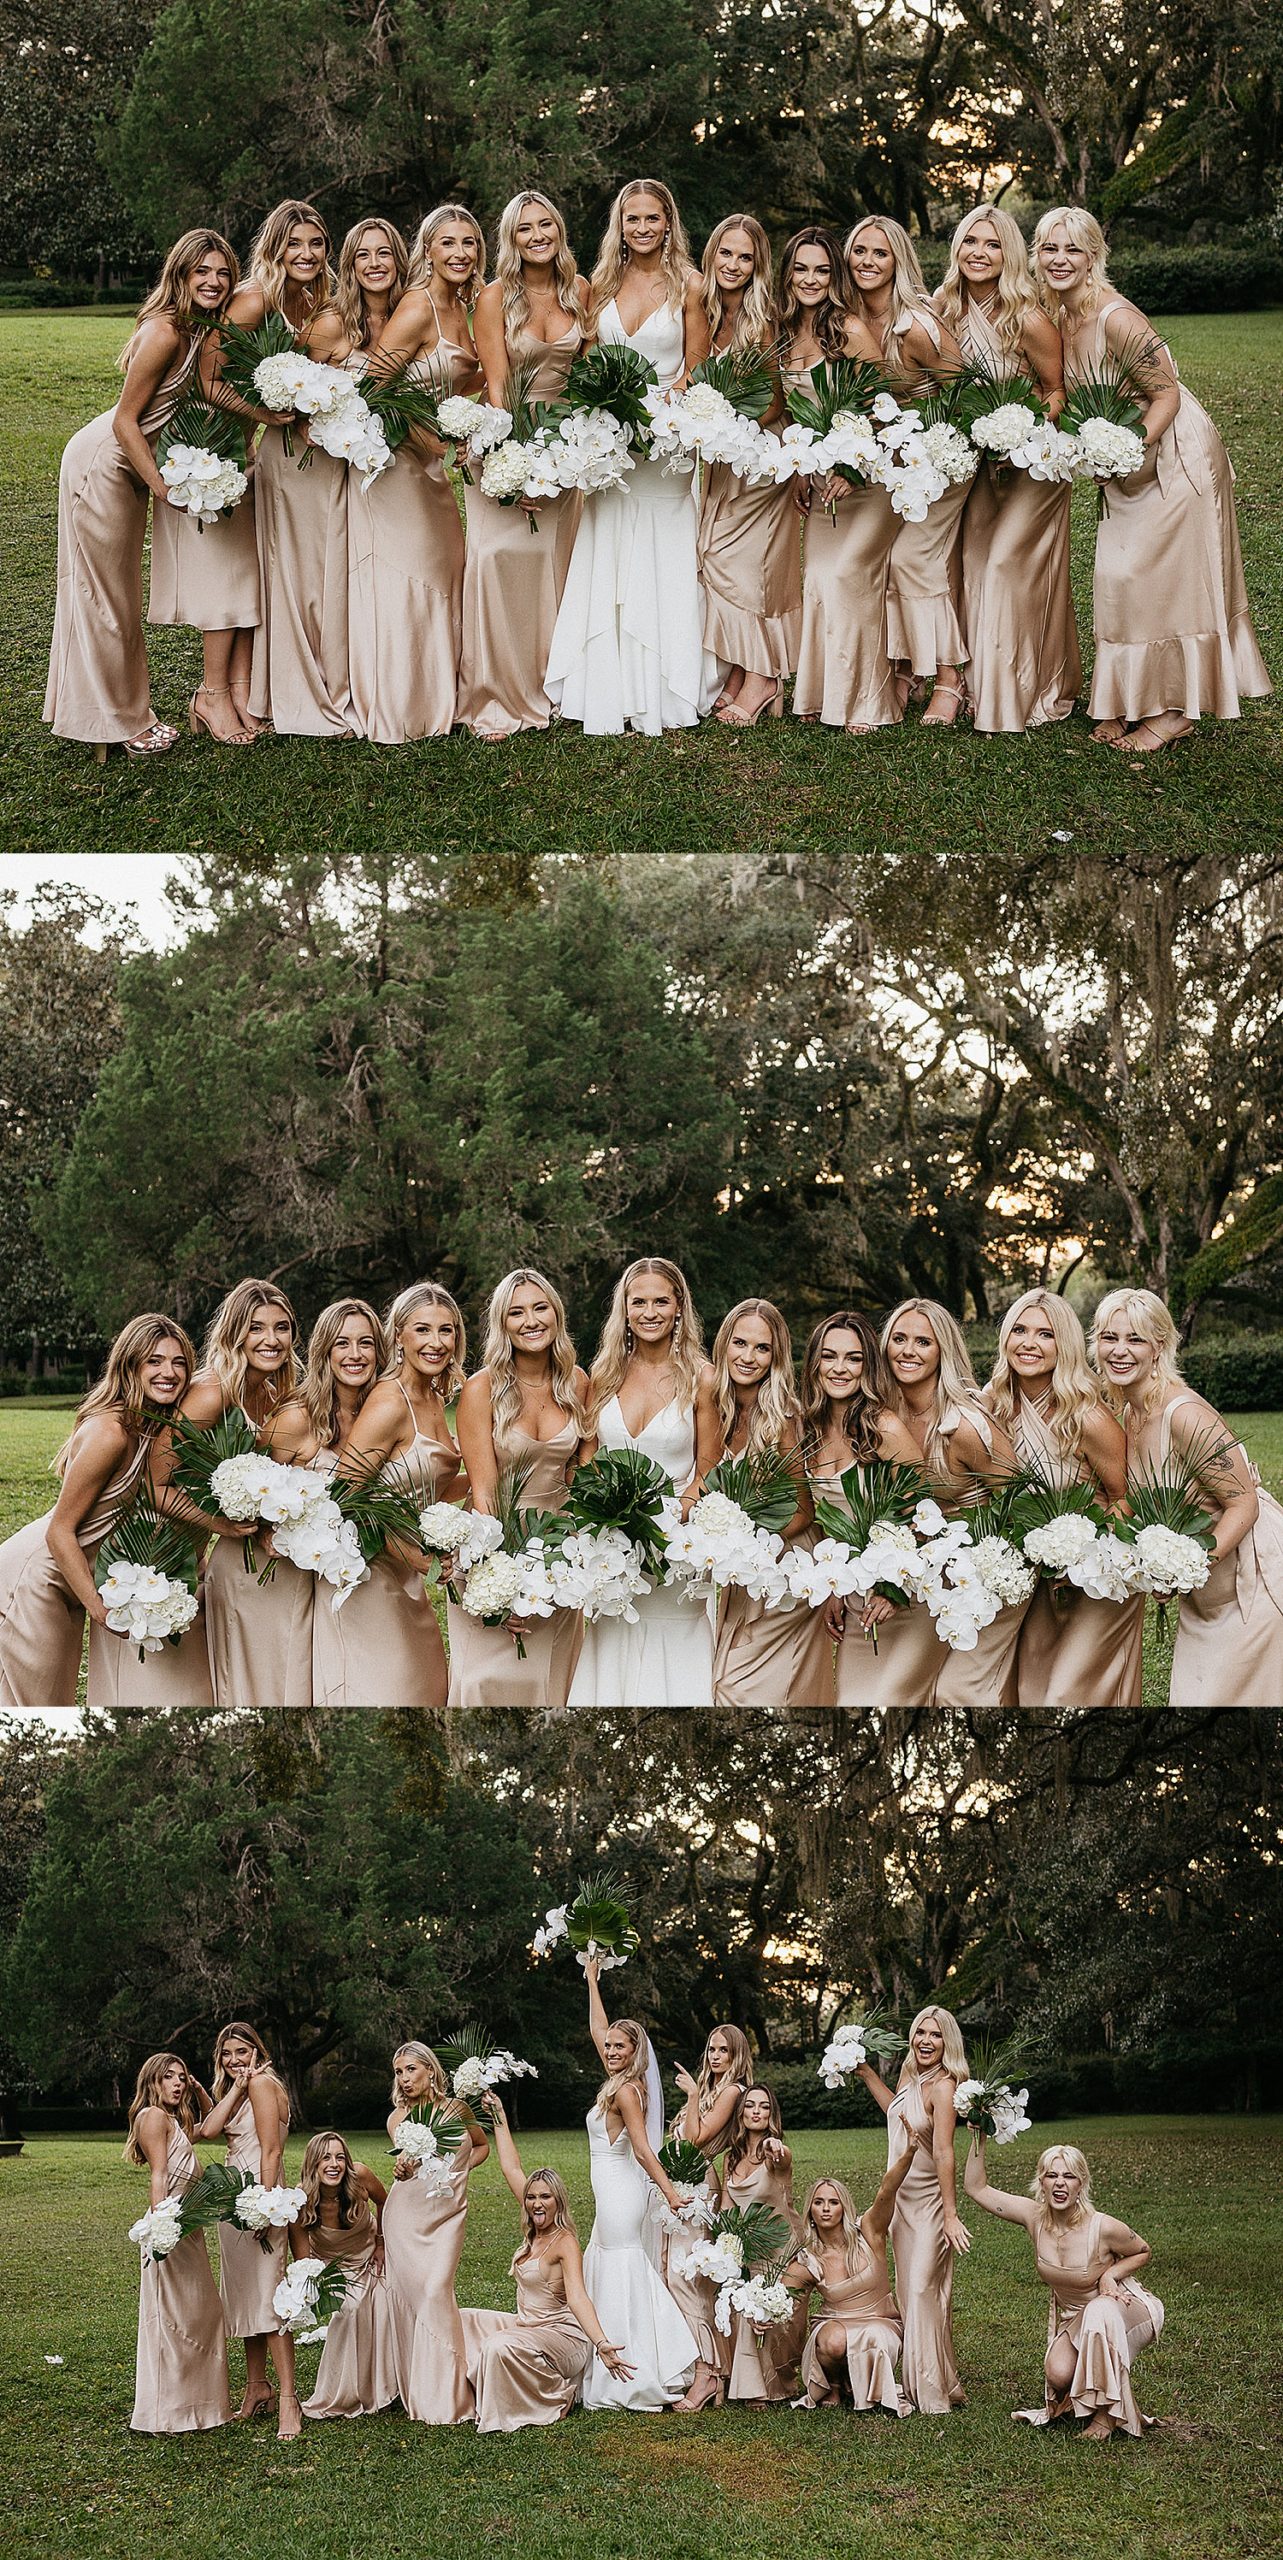 Bride and bridesmaids wearing champagne colored dresses holding white and green palm leaf bouquets